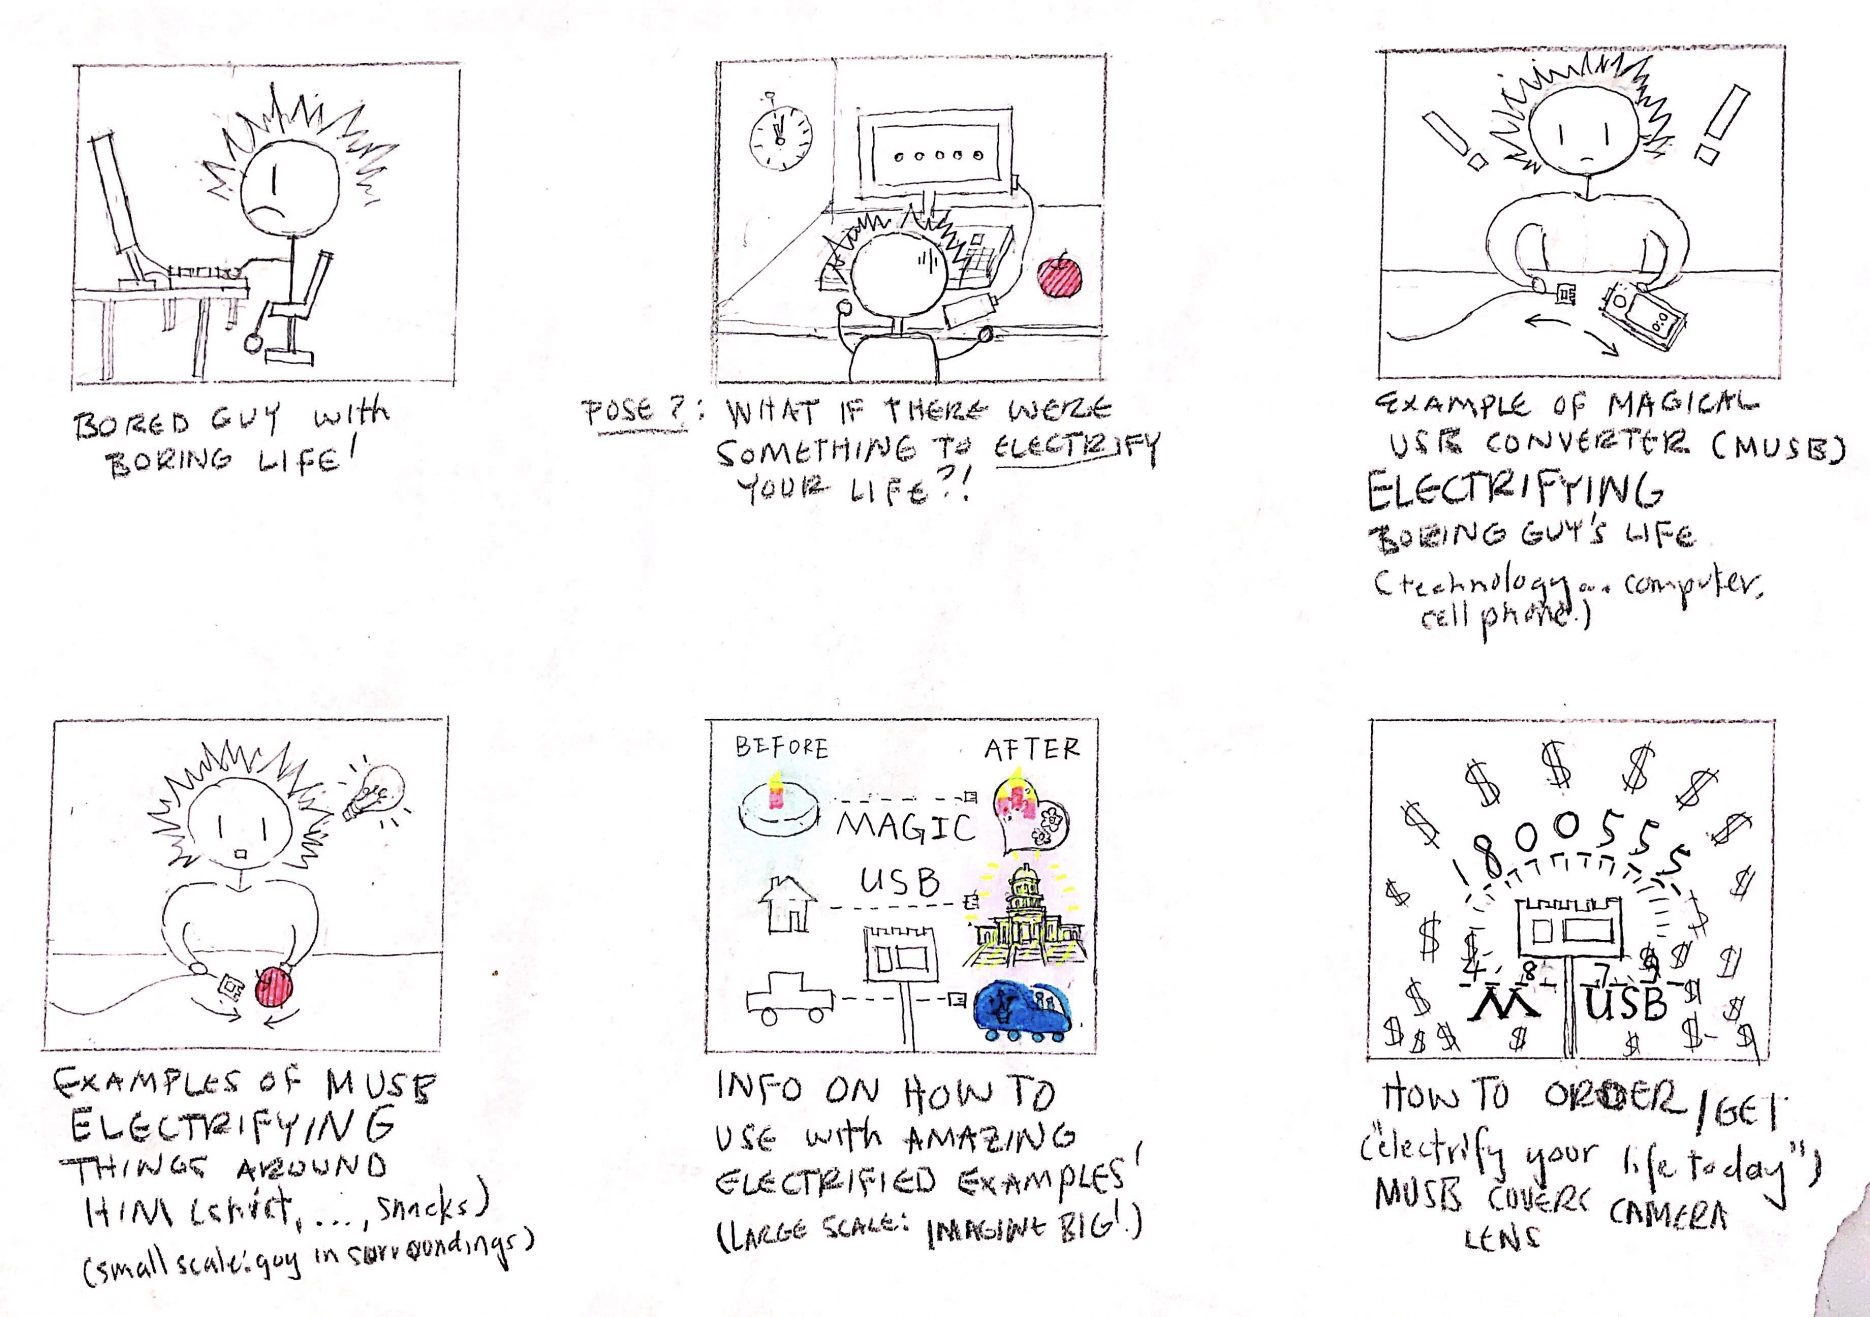 Colorized Version of Storyboard for Magical USB in preparation for our video project.